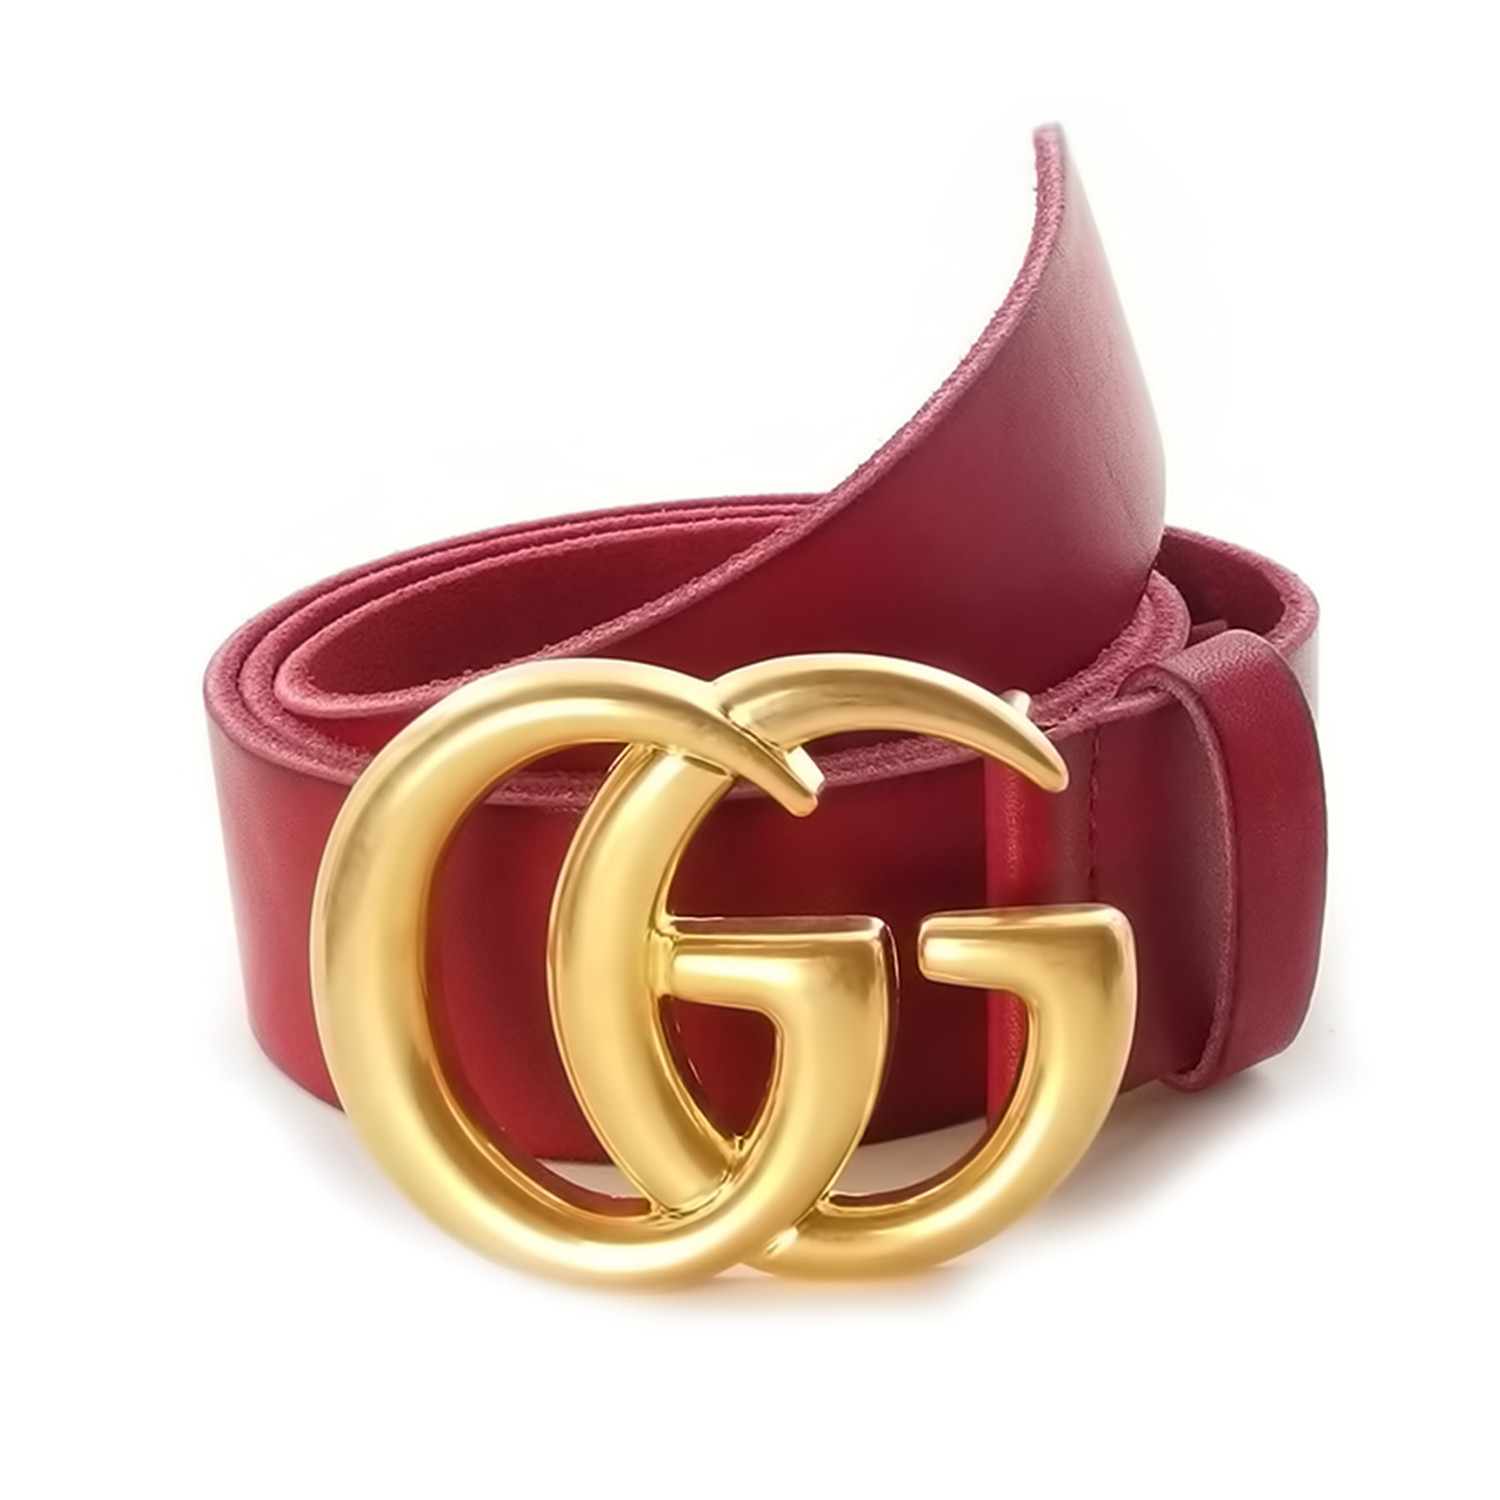 Contoured GG Belt // Red + Gold (85) - Gucci Belts - Touch of Modern